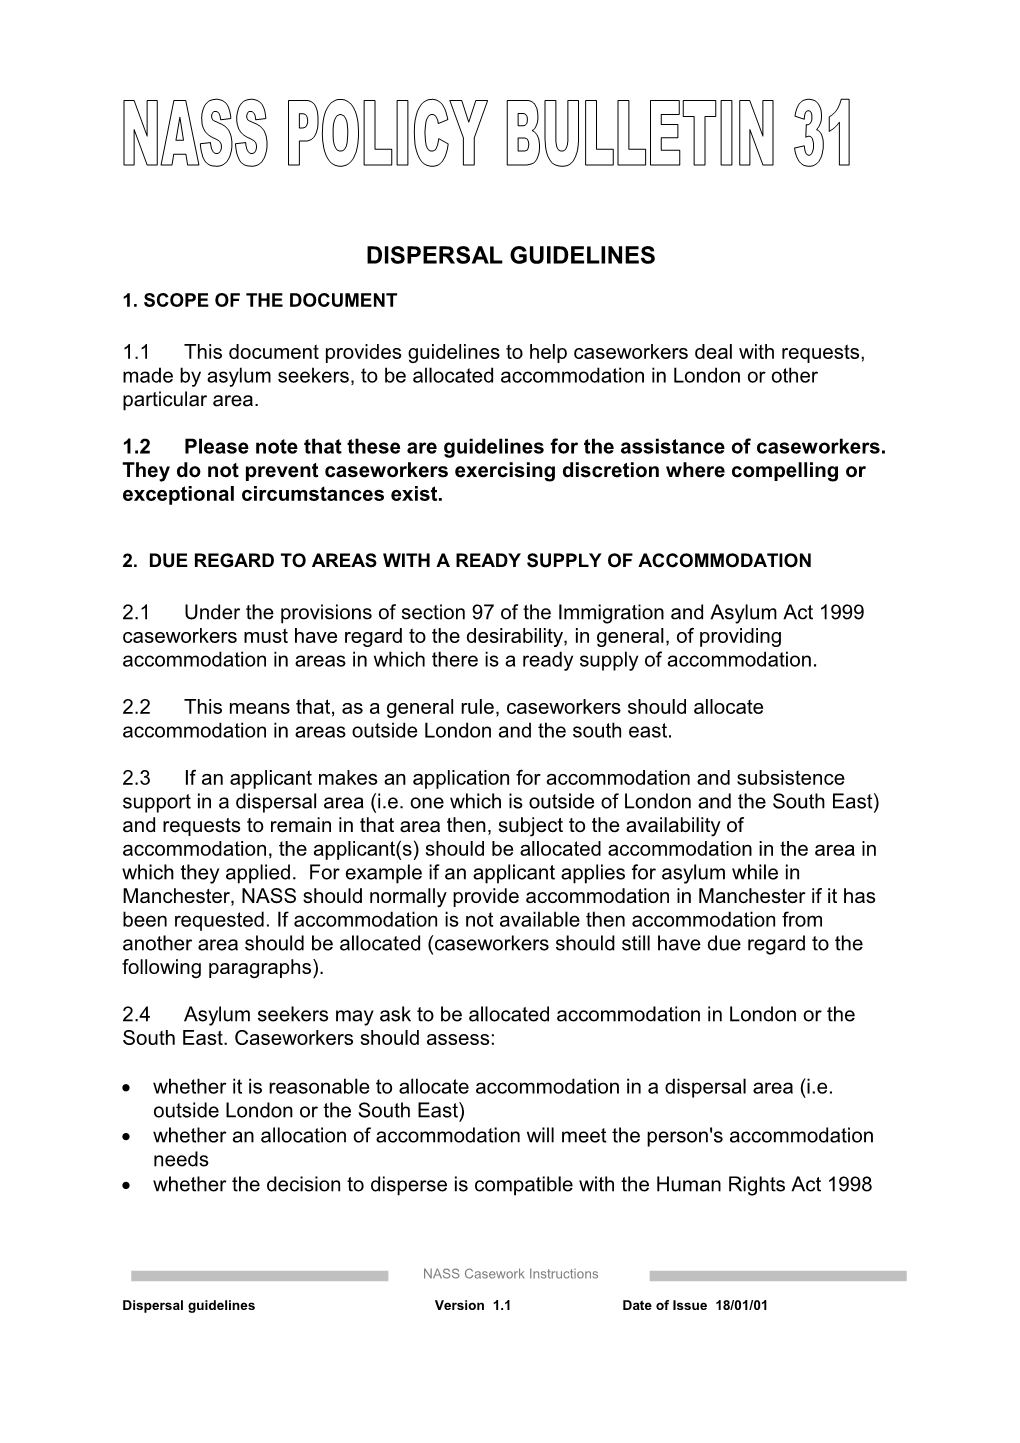 Dispersal Guidelines